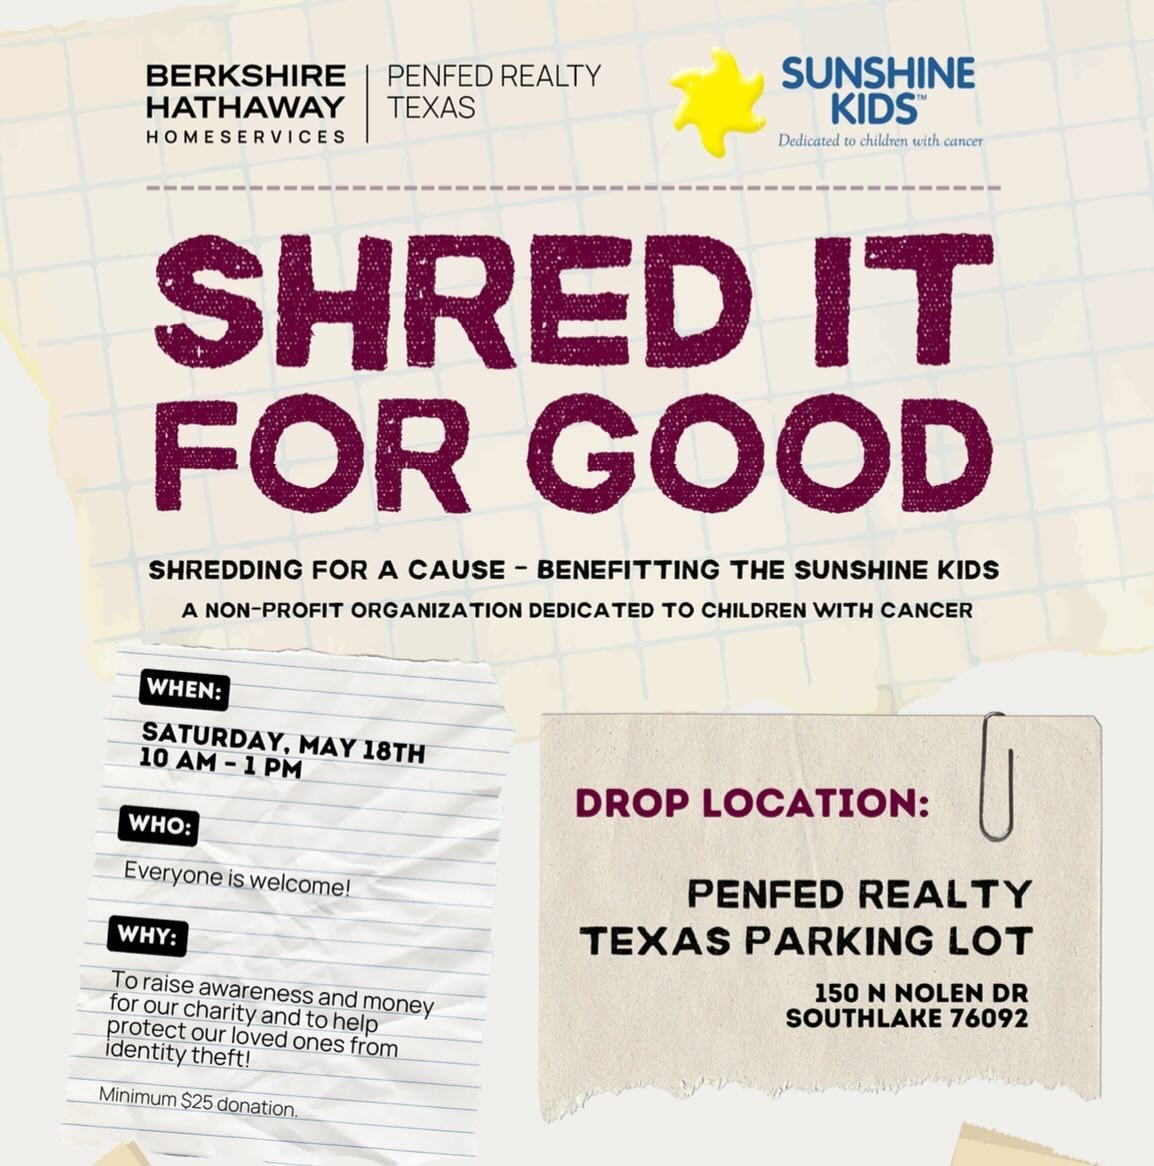 It&rsquo;s spring cleaning time y&rsquo;all! Mark your calendars because in 1 month, on May 18, we&rsquo;re hosting a shredding event at our Southlake office benefitting @sunshinekidsorg. Gather that big pile of old tax returns and other sensitive do